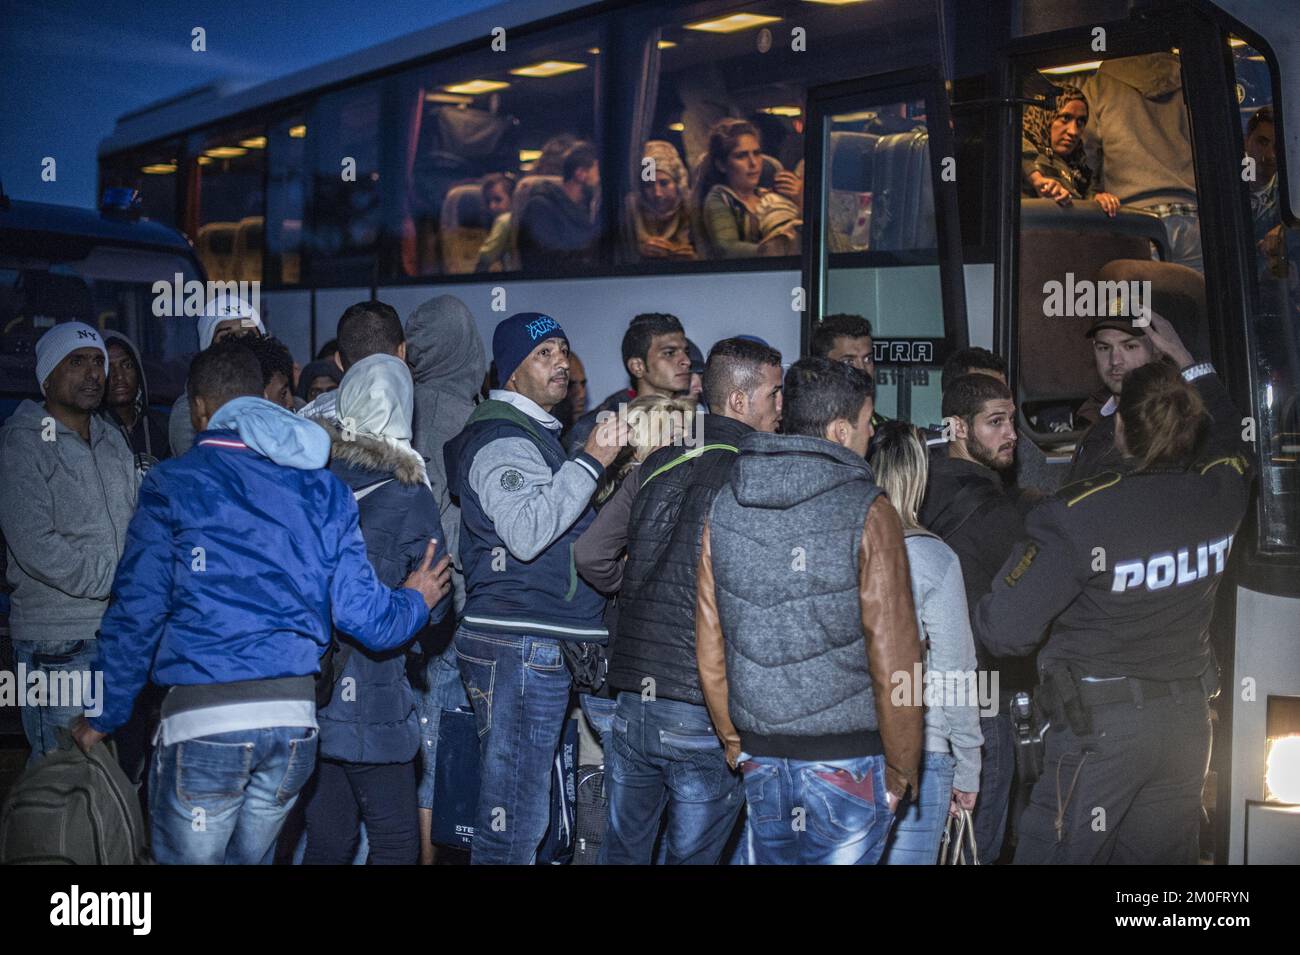 The first large group of refugees and immigrants has made it across the Danish border in Rødby in southern Zealand. According to the South Zealand and Lolland-Falster Police, about 170 refugees arrived in Rødby via two ferries from Puttgarden in Germany. Some migrants were fleeing from the police at Rødby, but were stopped and picked up in busses. The vast majority of the registered migrants come from Syria and those who will have their asylum cases tried in Denmark will be sent to Sandholmlejren refugee camp. Per Rasmussen / Polfoto  Flygtninge på flugt fra politiet ved Rødbyhavn. Ca hundrede Stock Photo